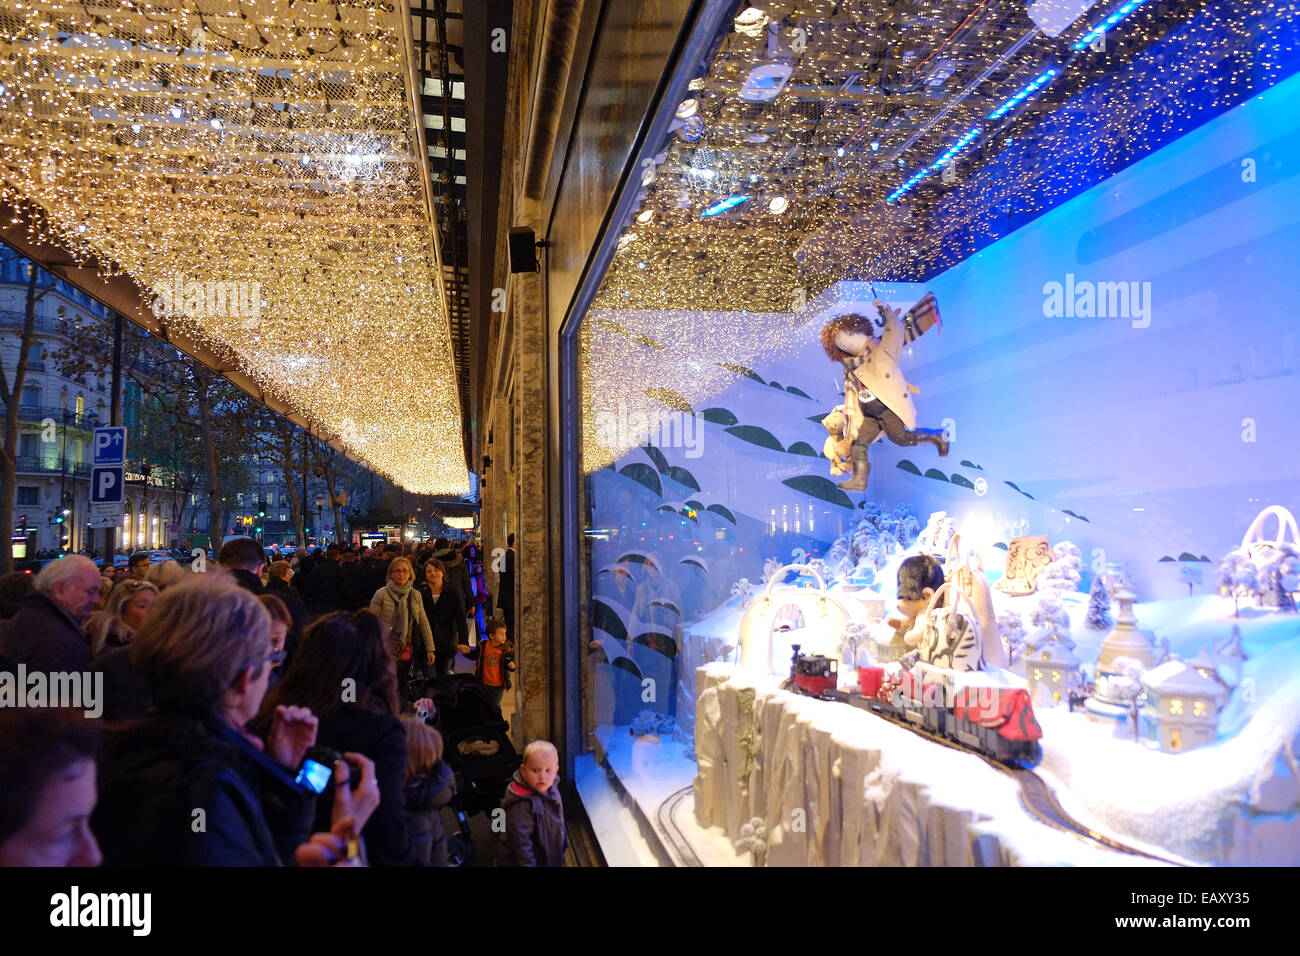 Burberry window display hi-res stock photography and images - Alamy